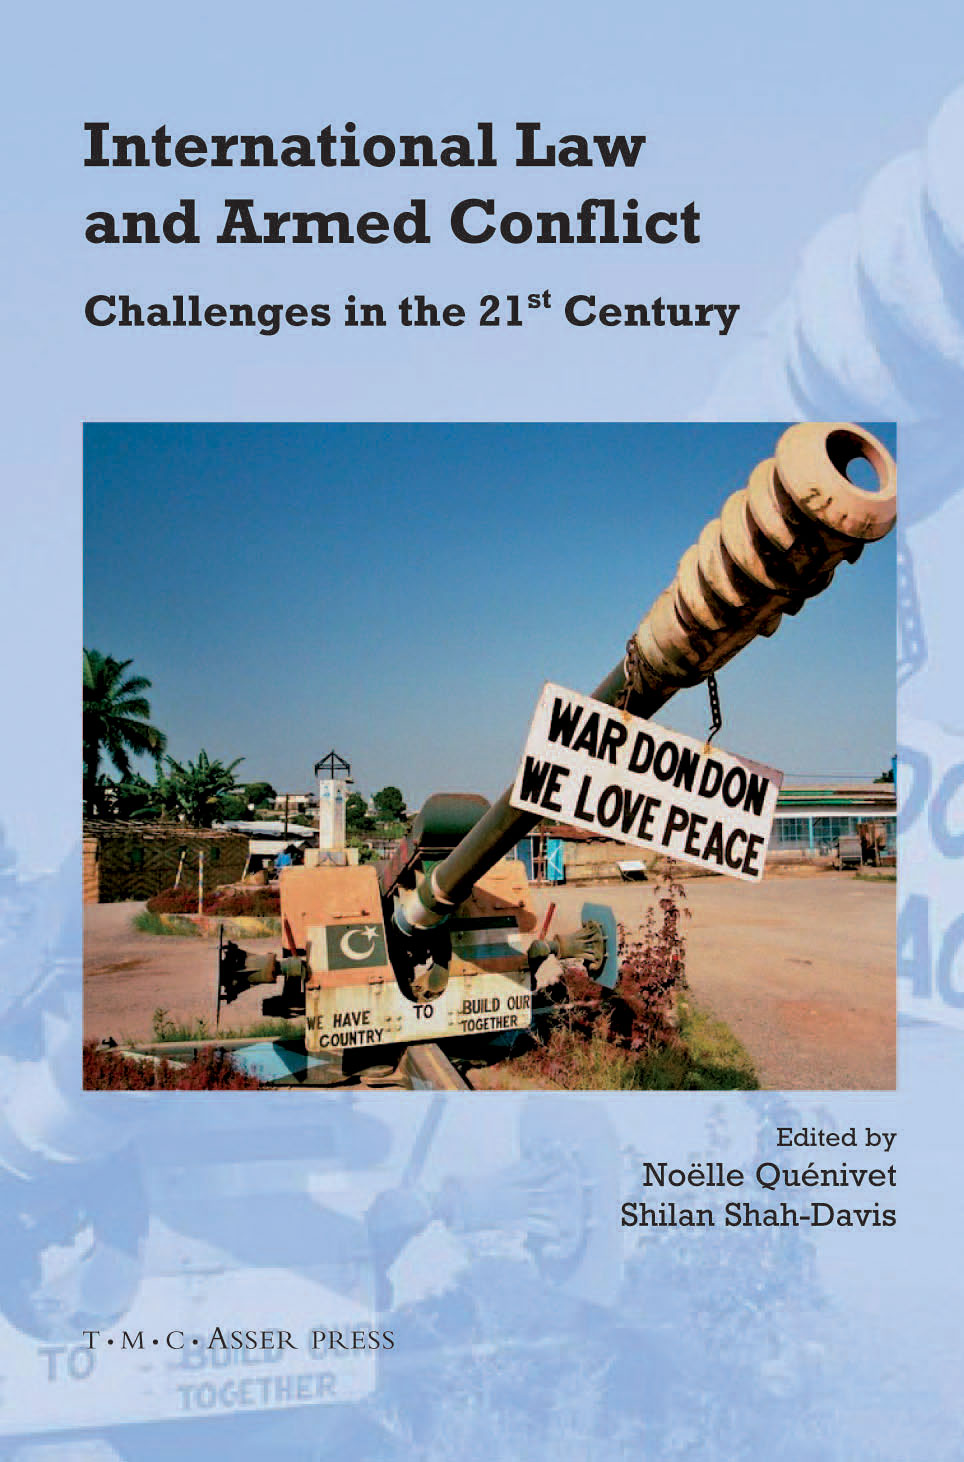 International Law and Armed Conflict - Challenges in the 21st Century